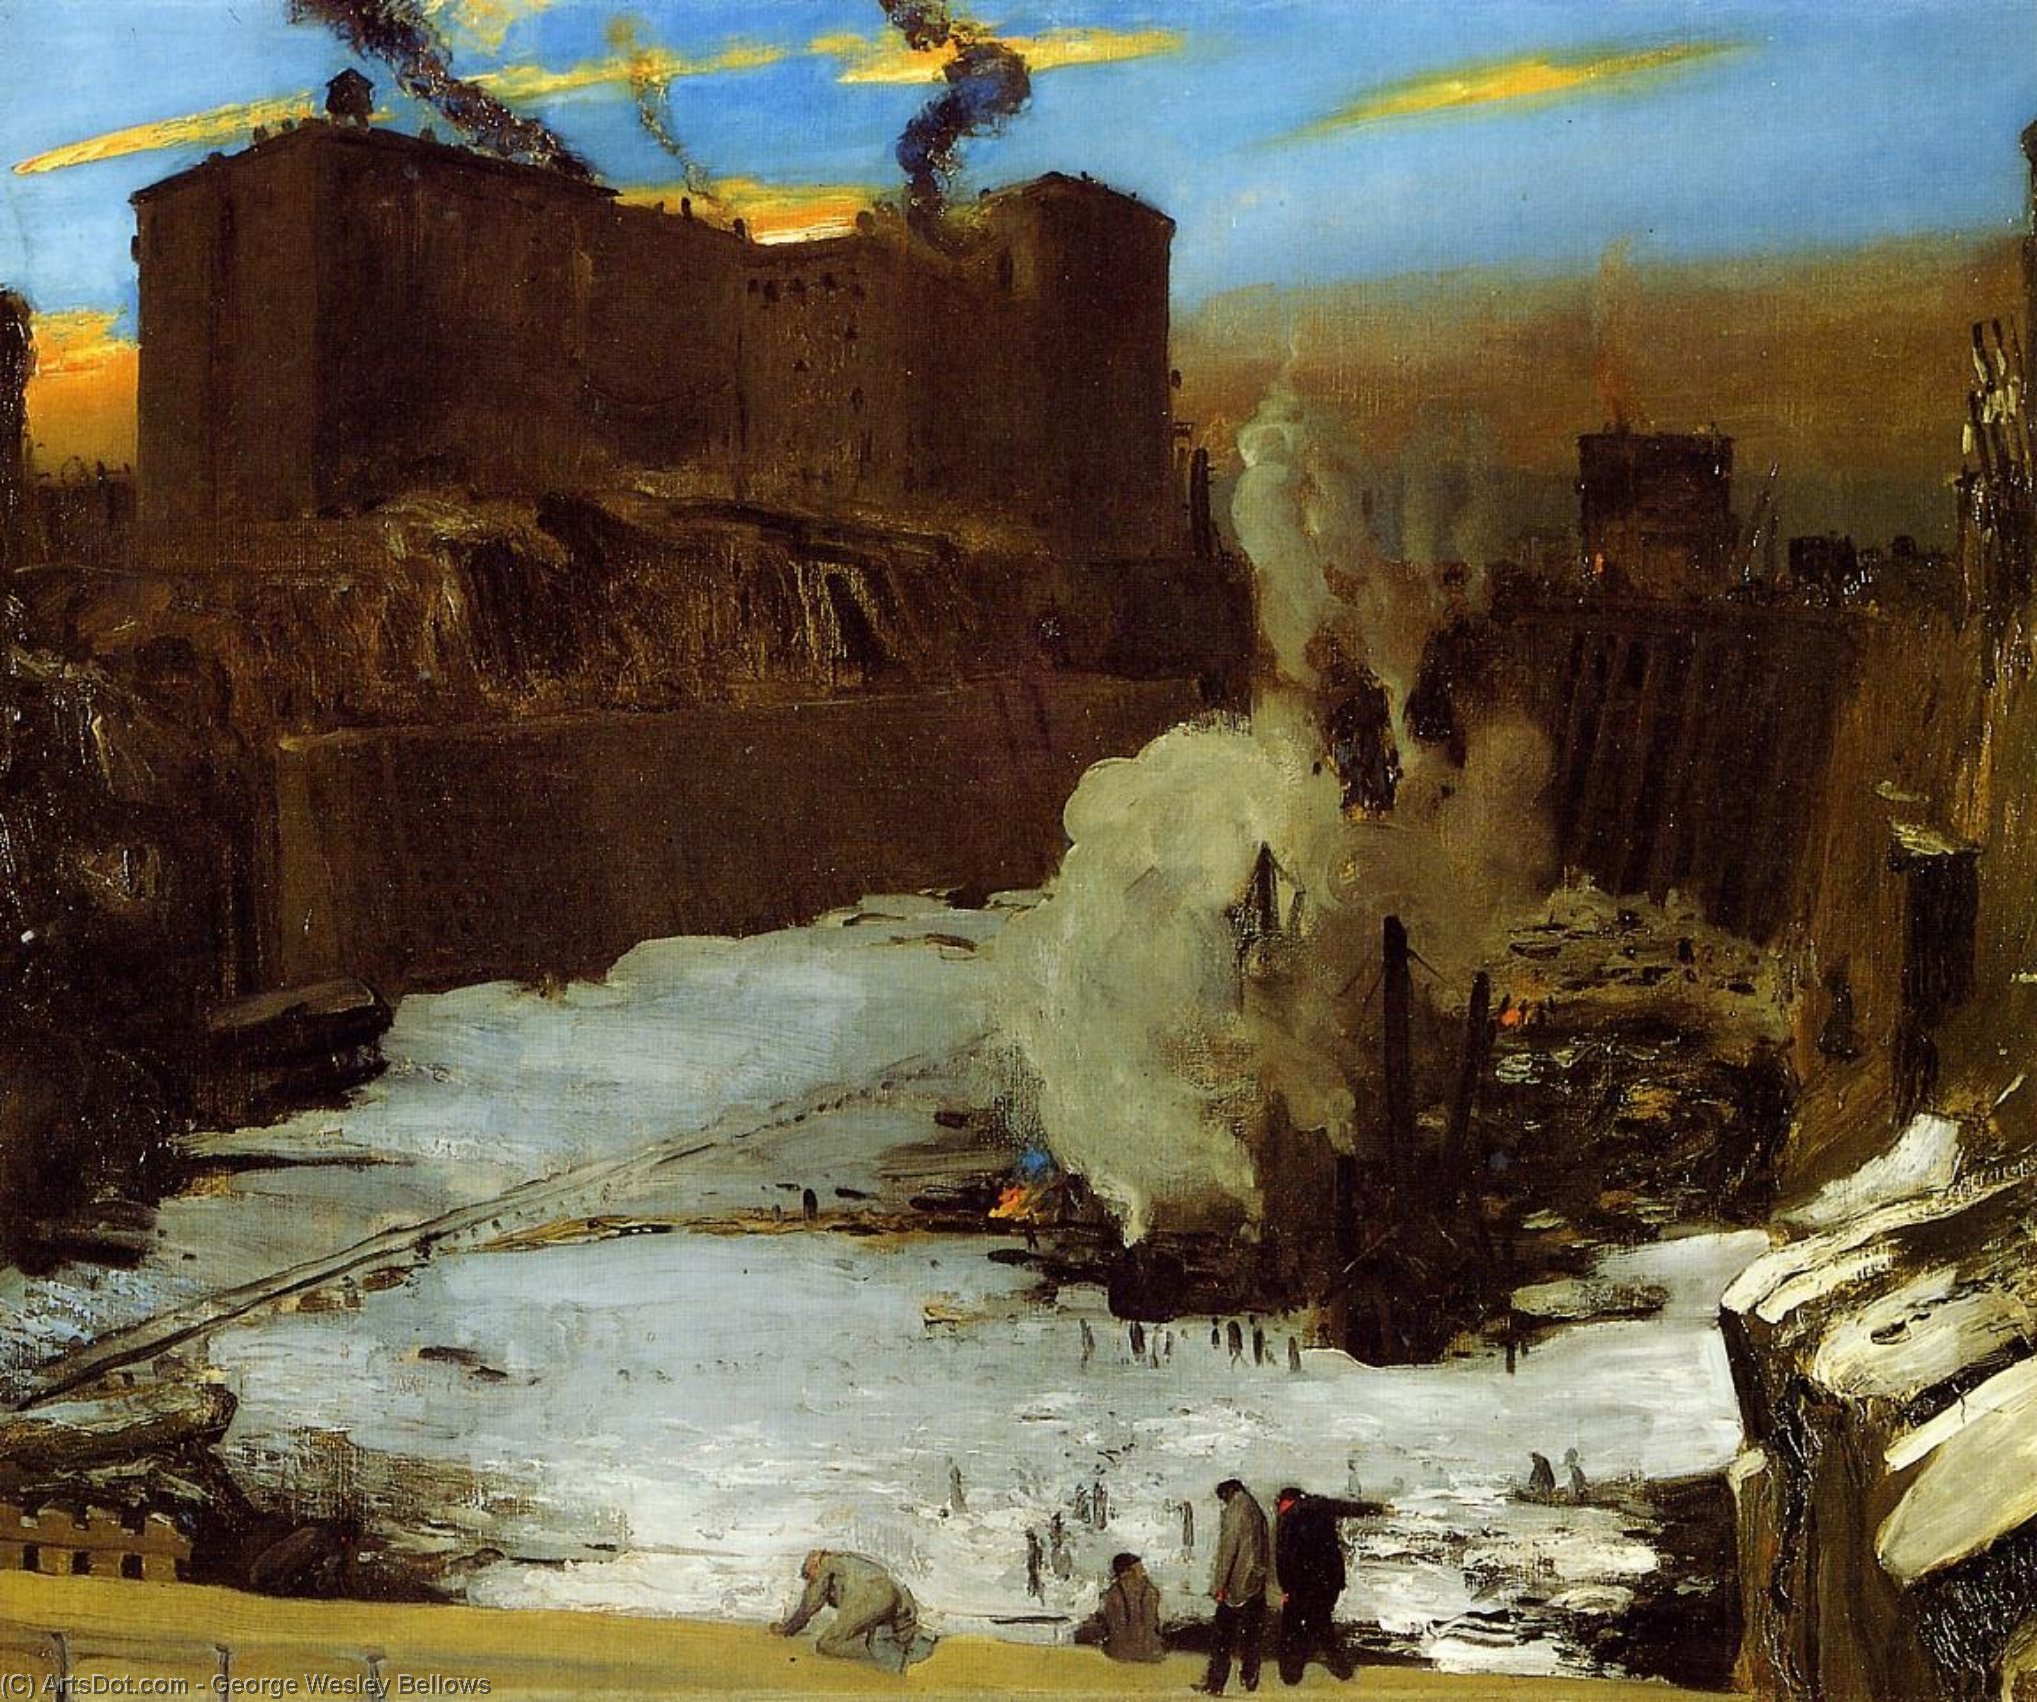 Order Art Reproductions Pennsylvania Station Excavation, 1909 by George Wesley Bellows (1882-1925, United States) | ArtsDot.com